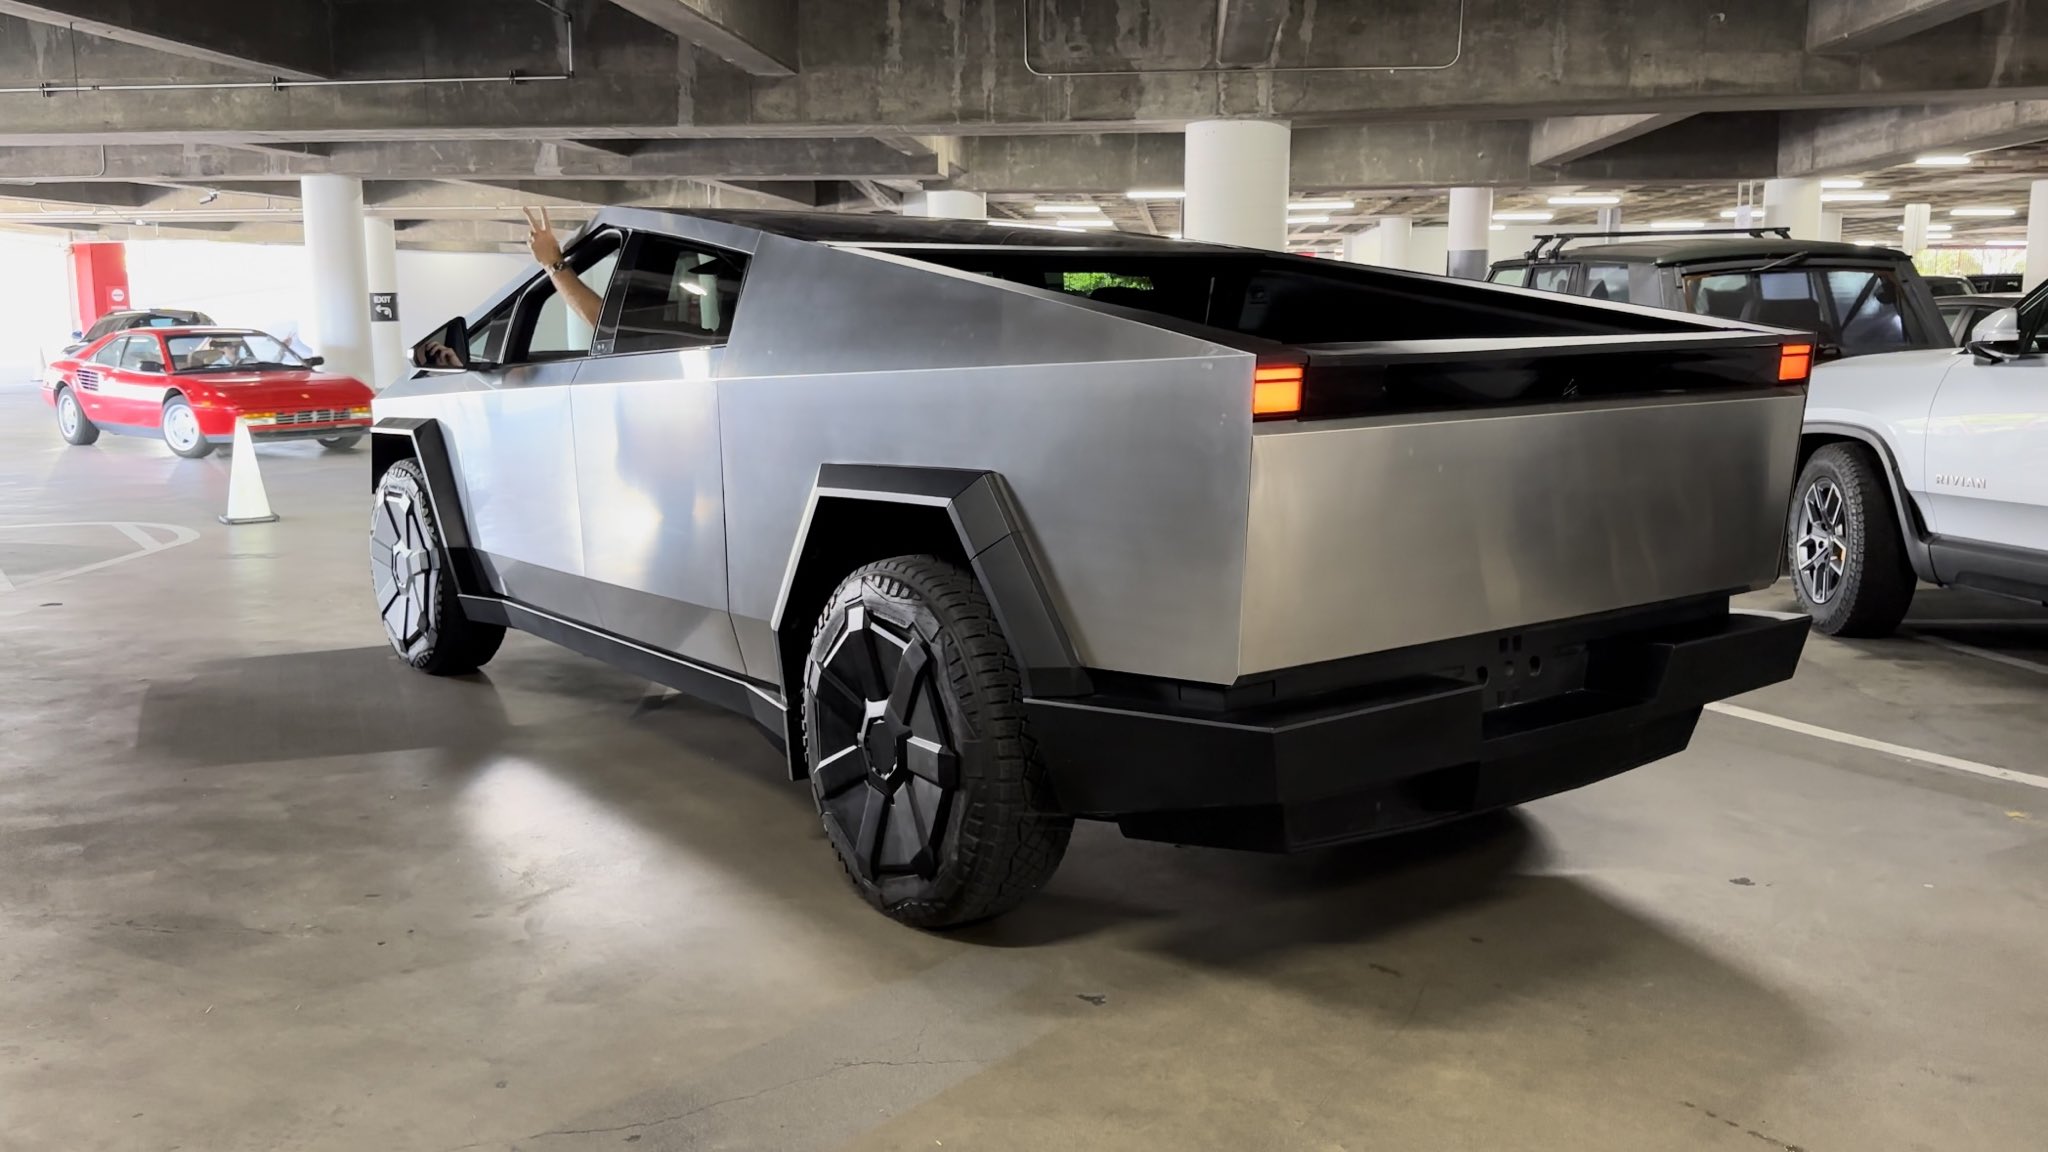 Tesla Cybertruck Wows at Petersen Automotive Museum’s Electrified Cars & Coffee Event